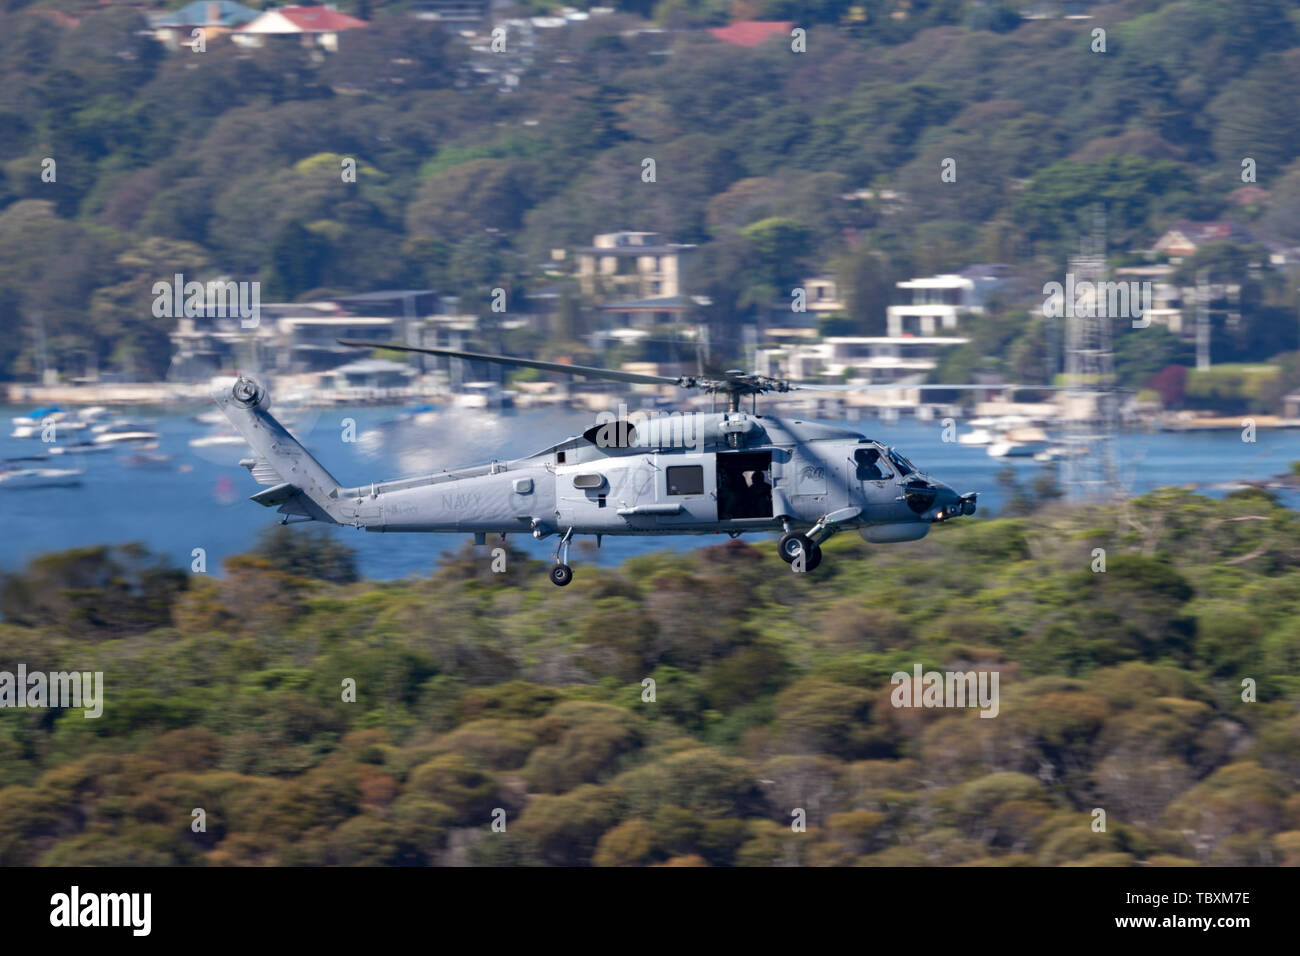 Royal Australian Navy (RAN) Sikorsky S-70B-2 Seahawk Helicopter N24-001 over Sydney Harbour. Stock Photo